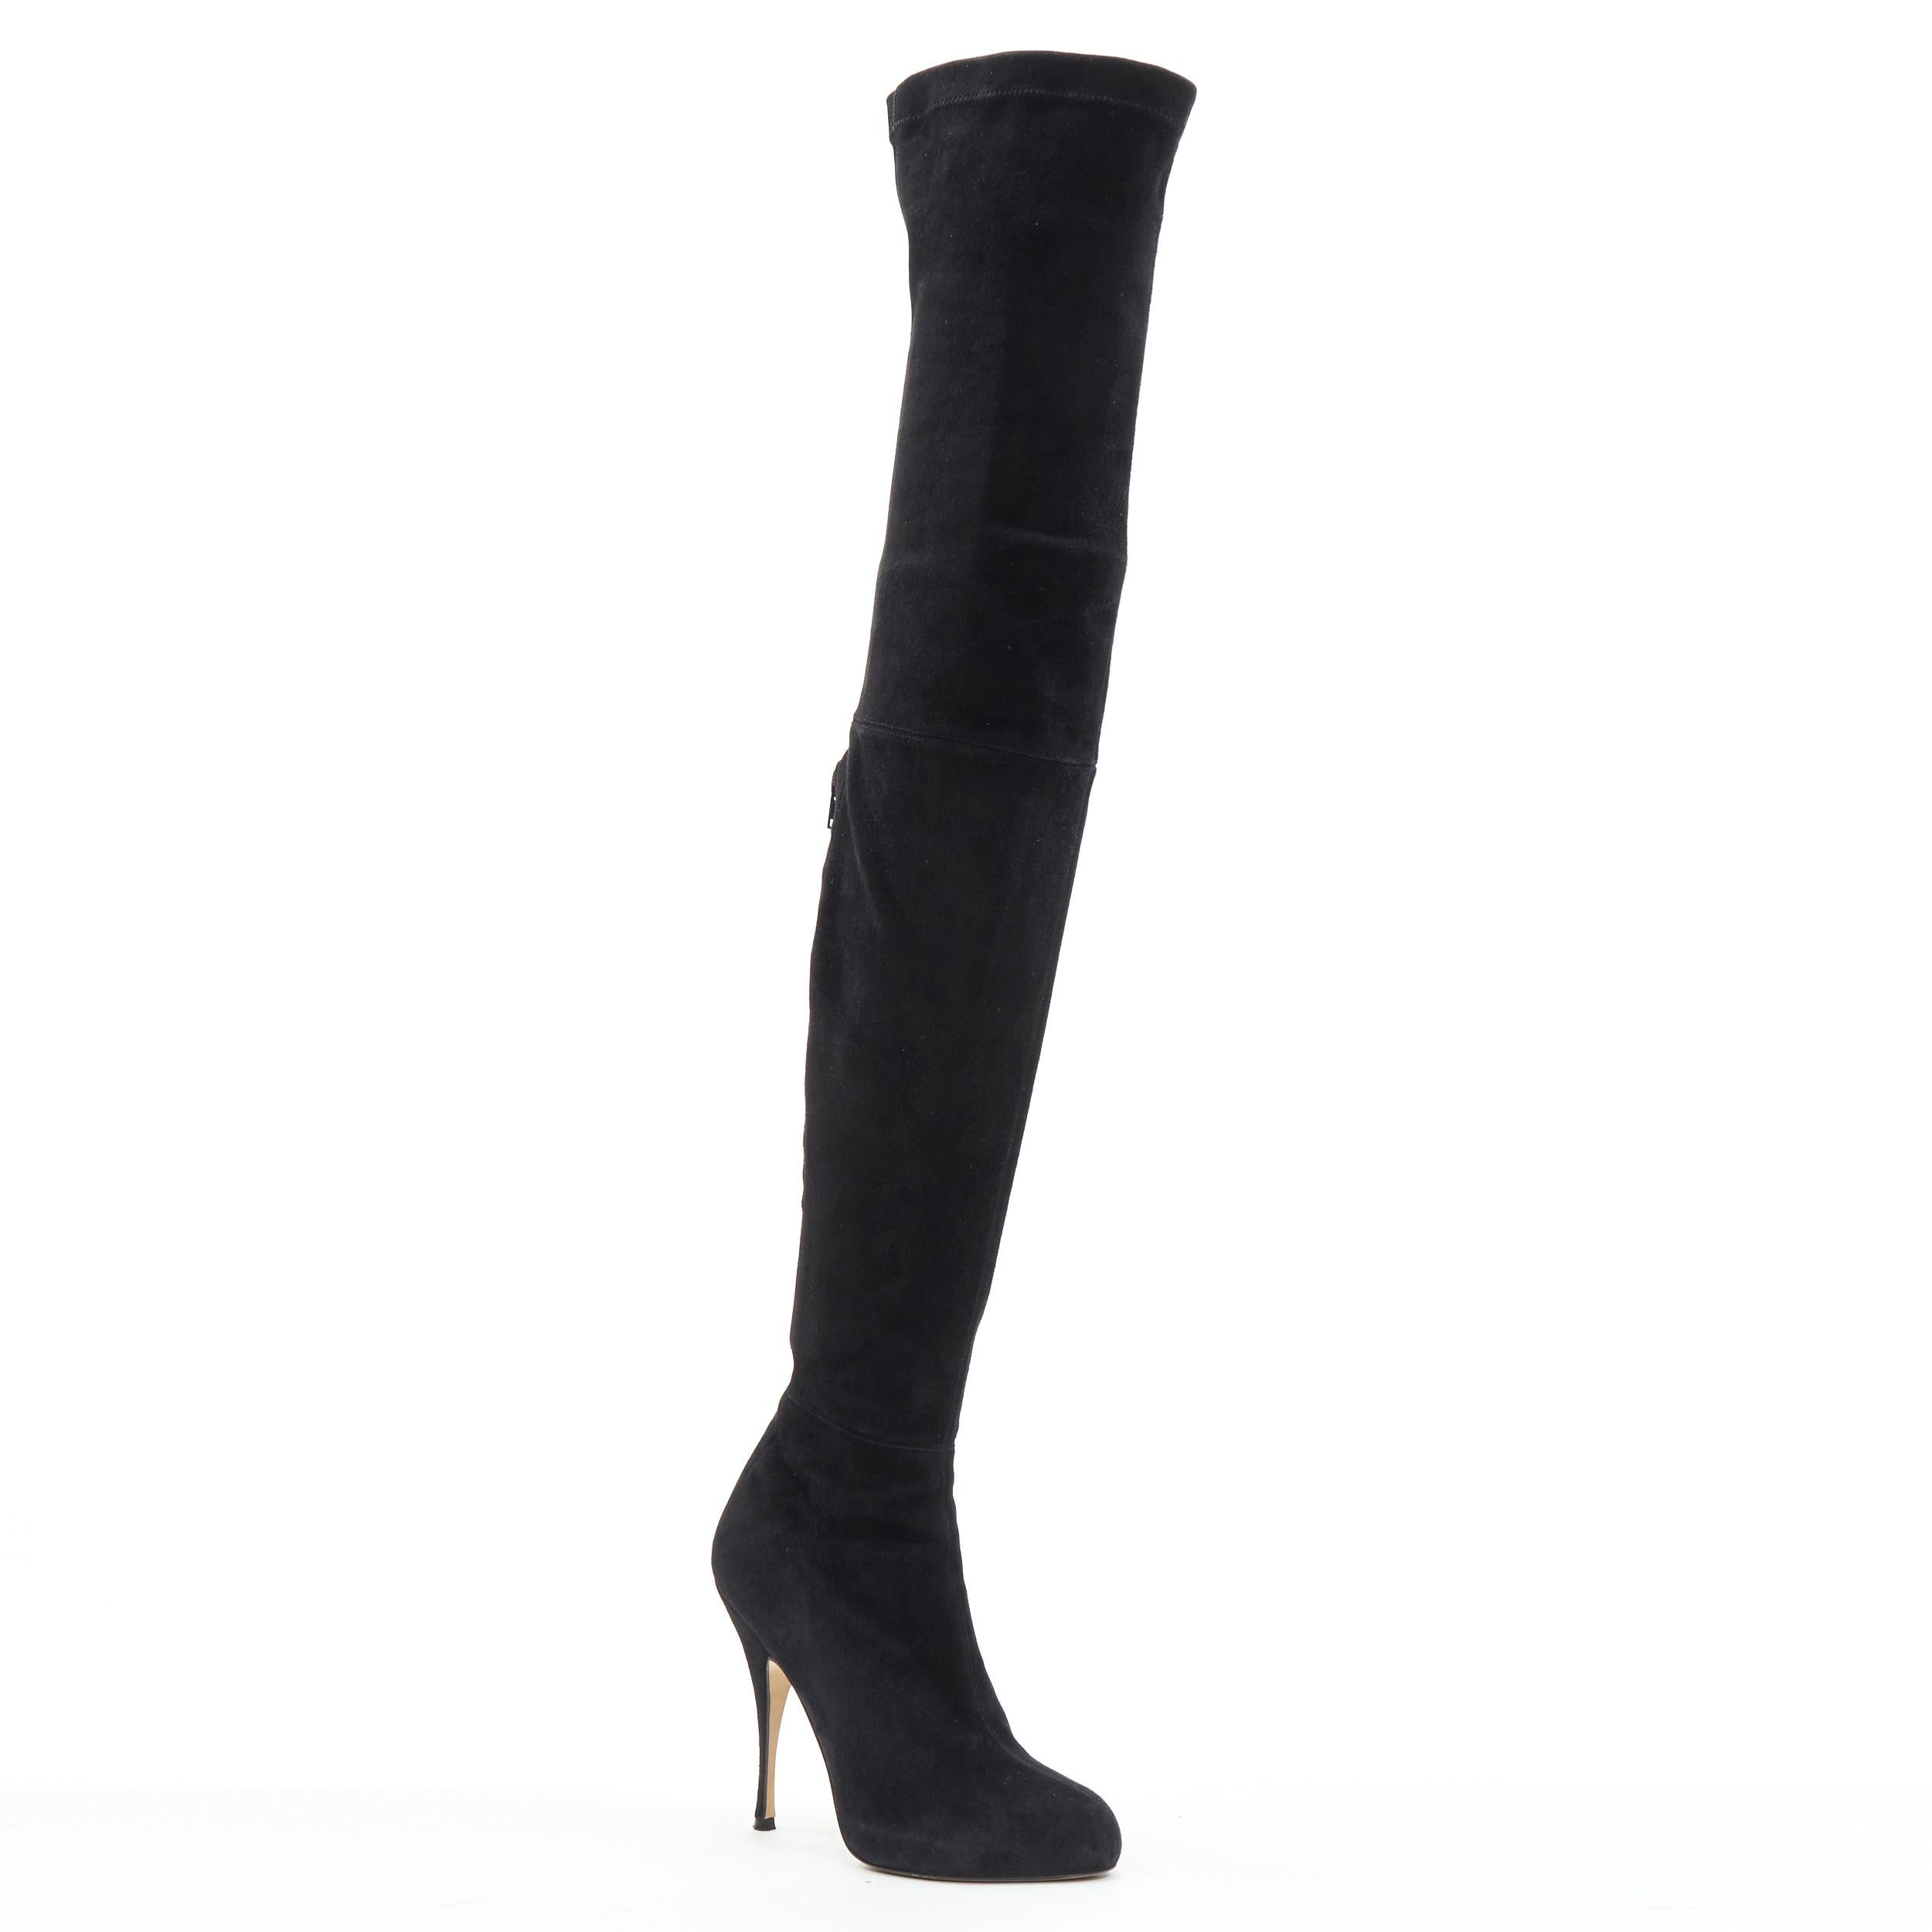 BRIAN ATWOOD black suede leather platform high heel thigh high boot EU38 
Reference: GIYG/A00120 
Brand: Brian Atwood 
Material: Suede 
Color: Black 
Pattern: Solid 
Closure: Zip 
Extra Detail: Thigh high boots. 
Made in: Italy 


CONDITION: